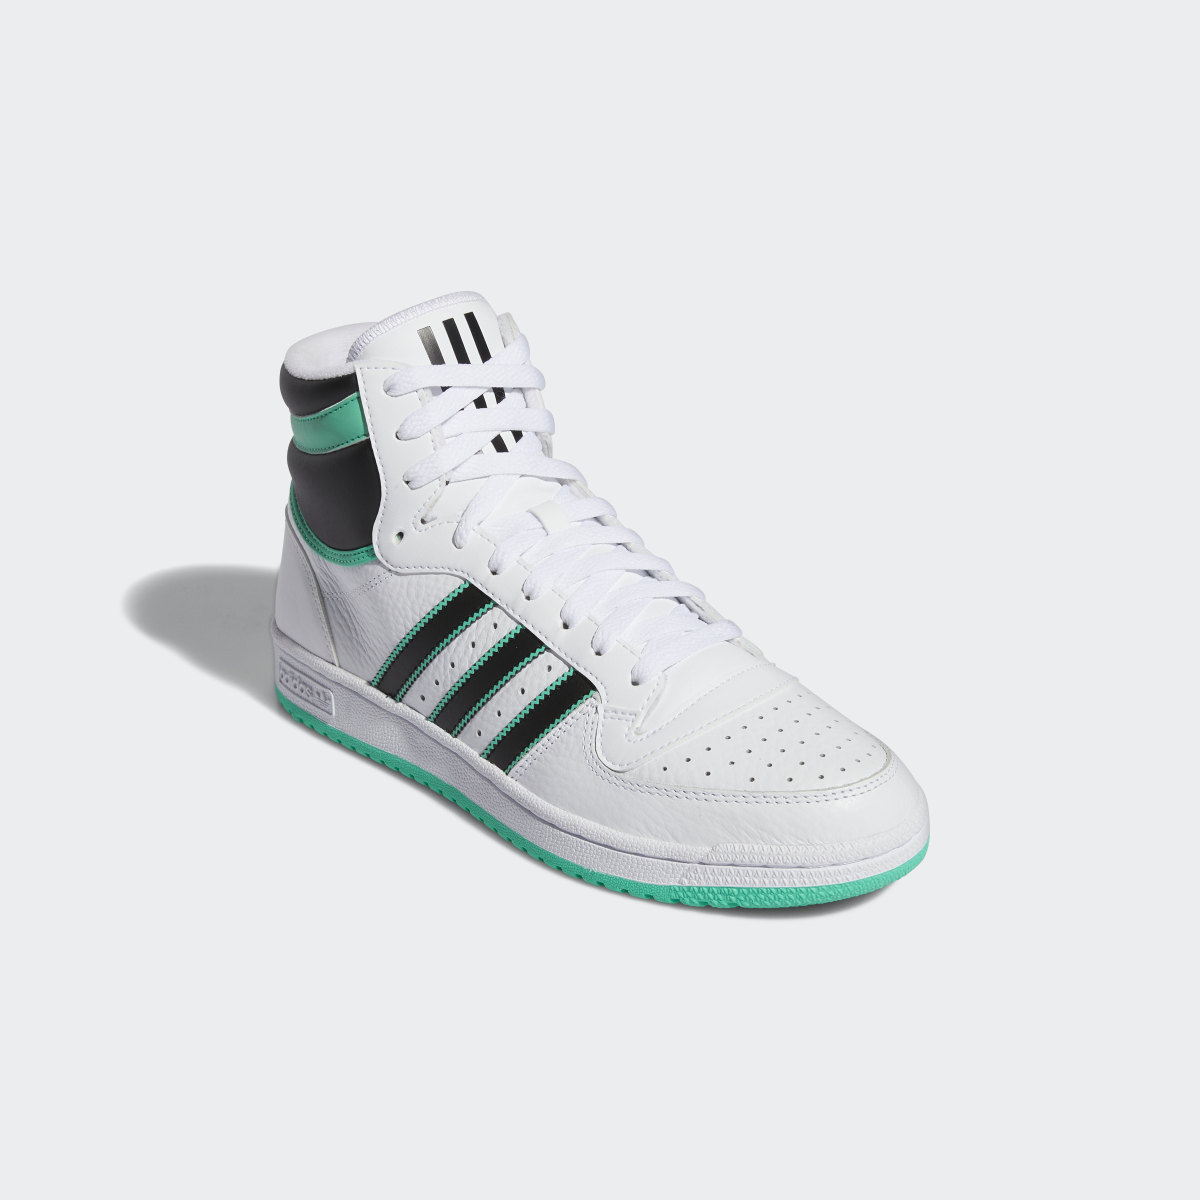 Adidas Top Ten RB Shoes. 5